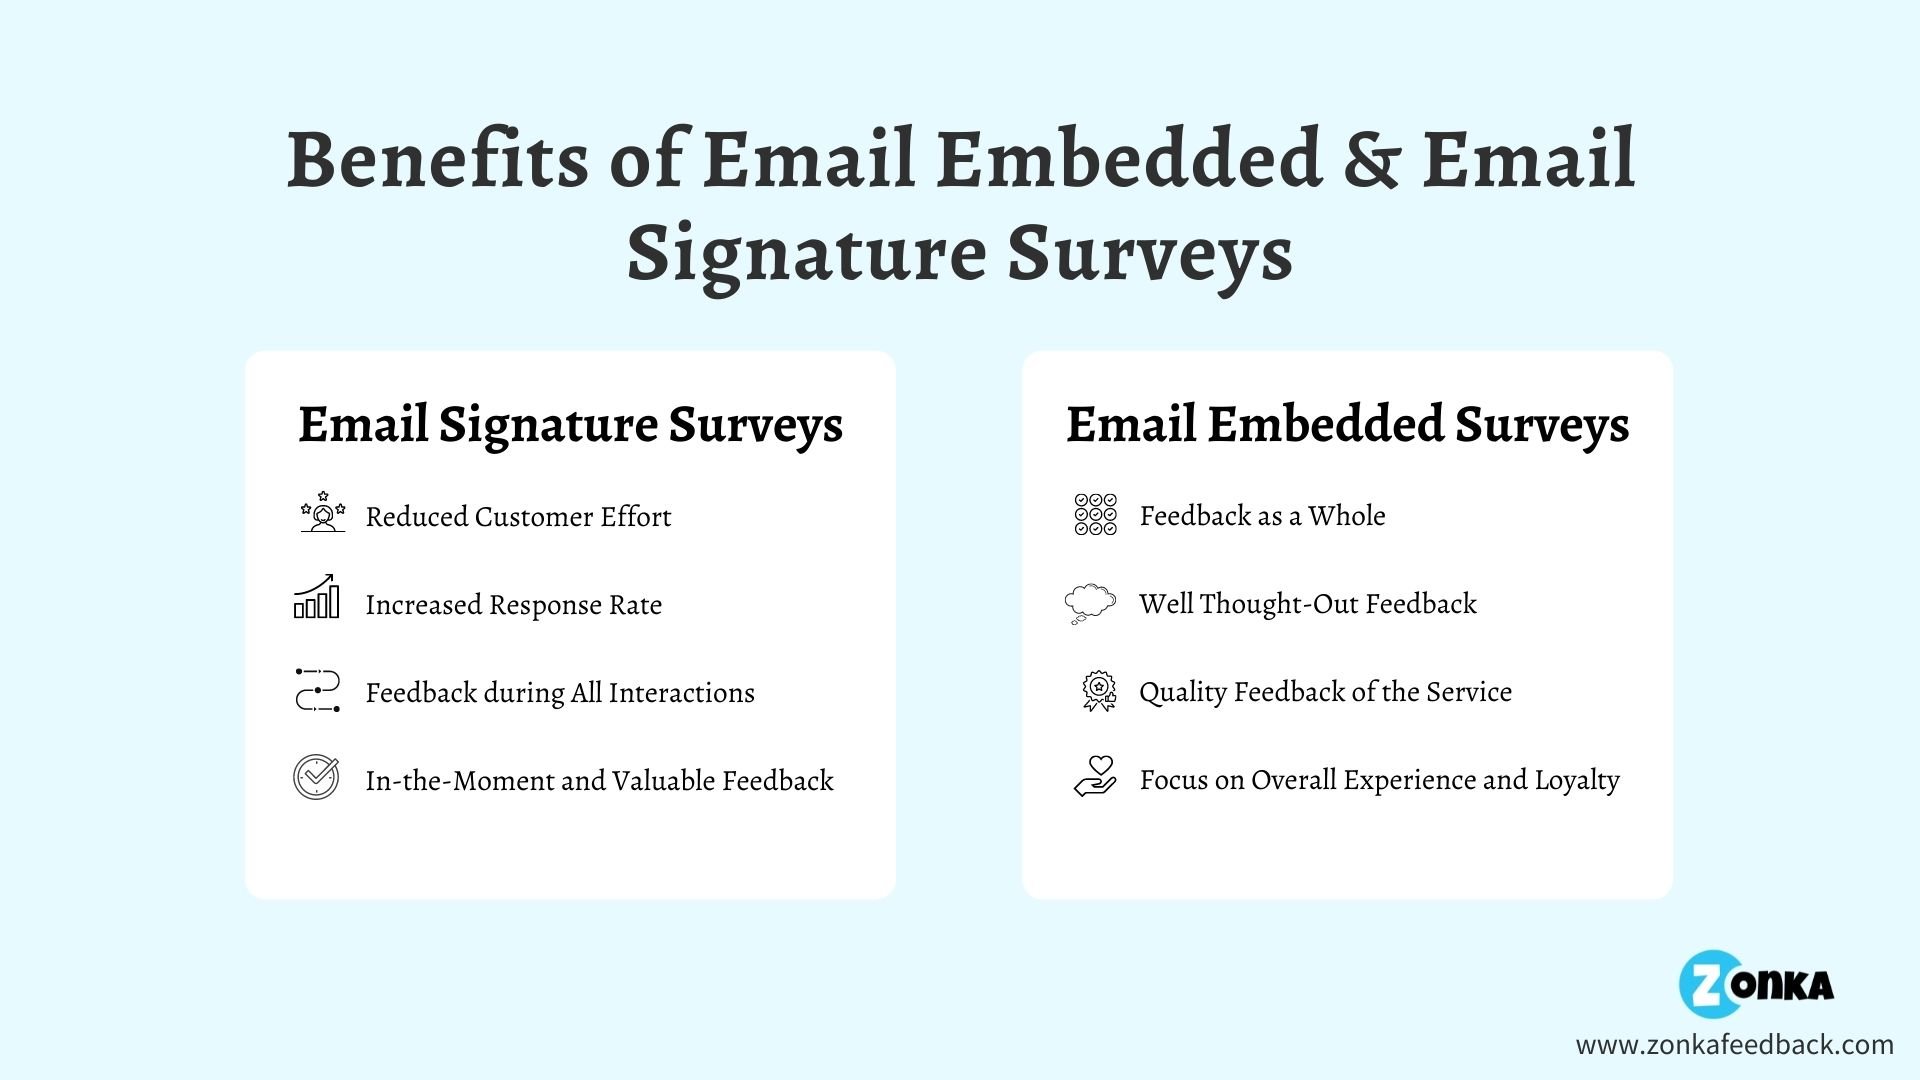 Benefits of Email Embedded & Email Signature Surveys (2)